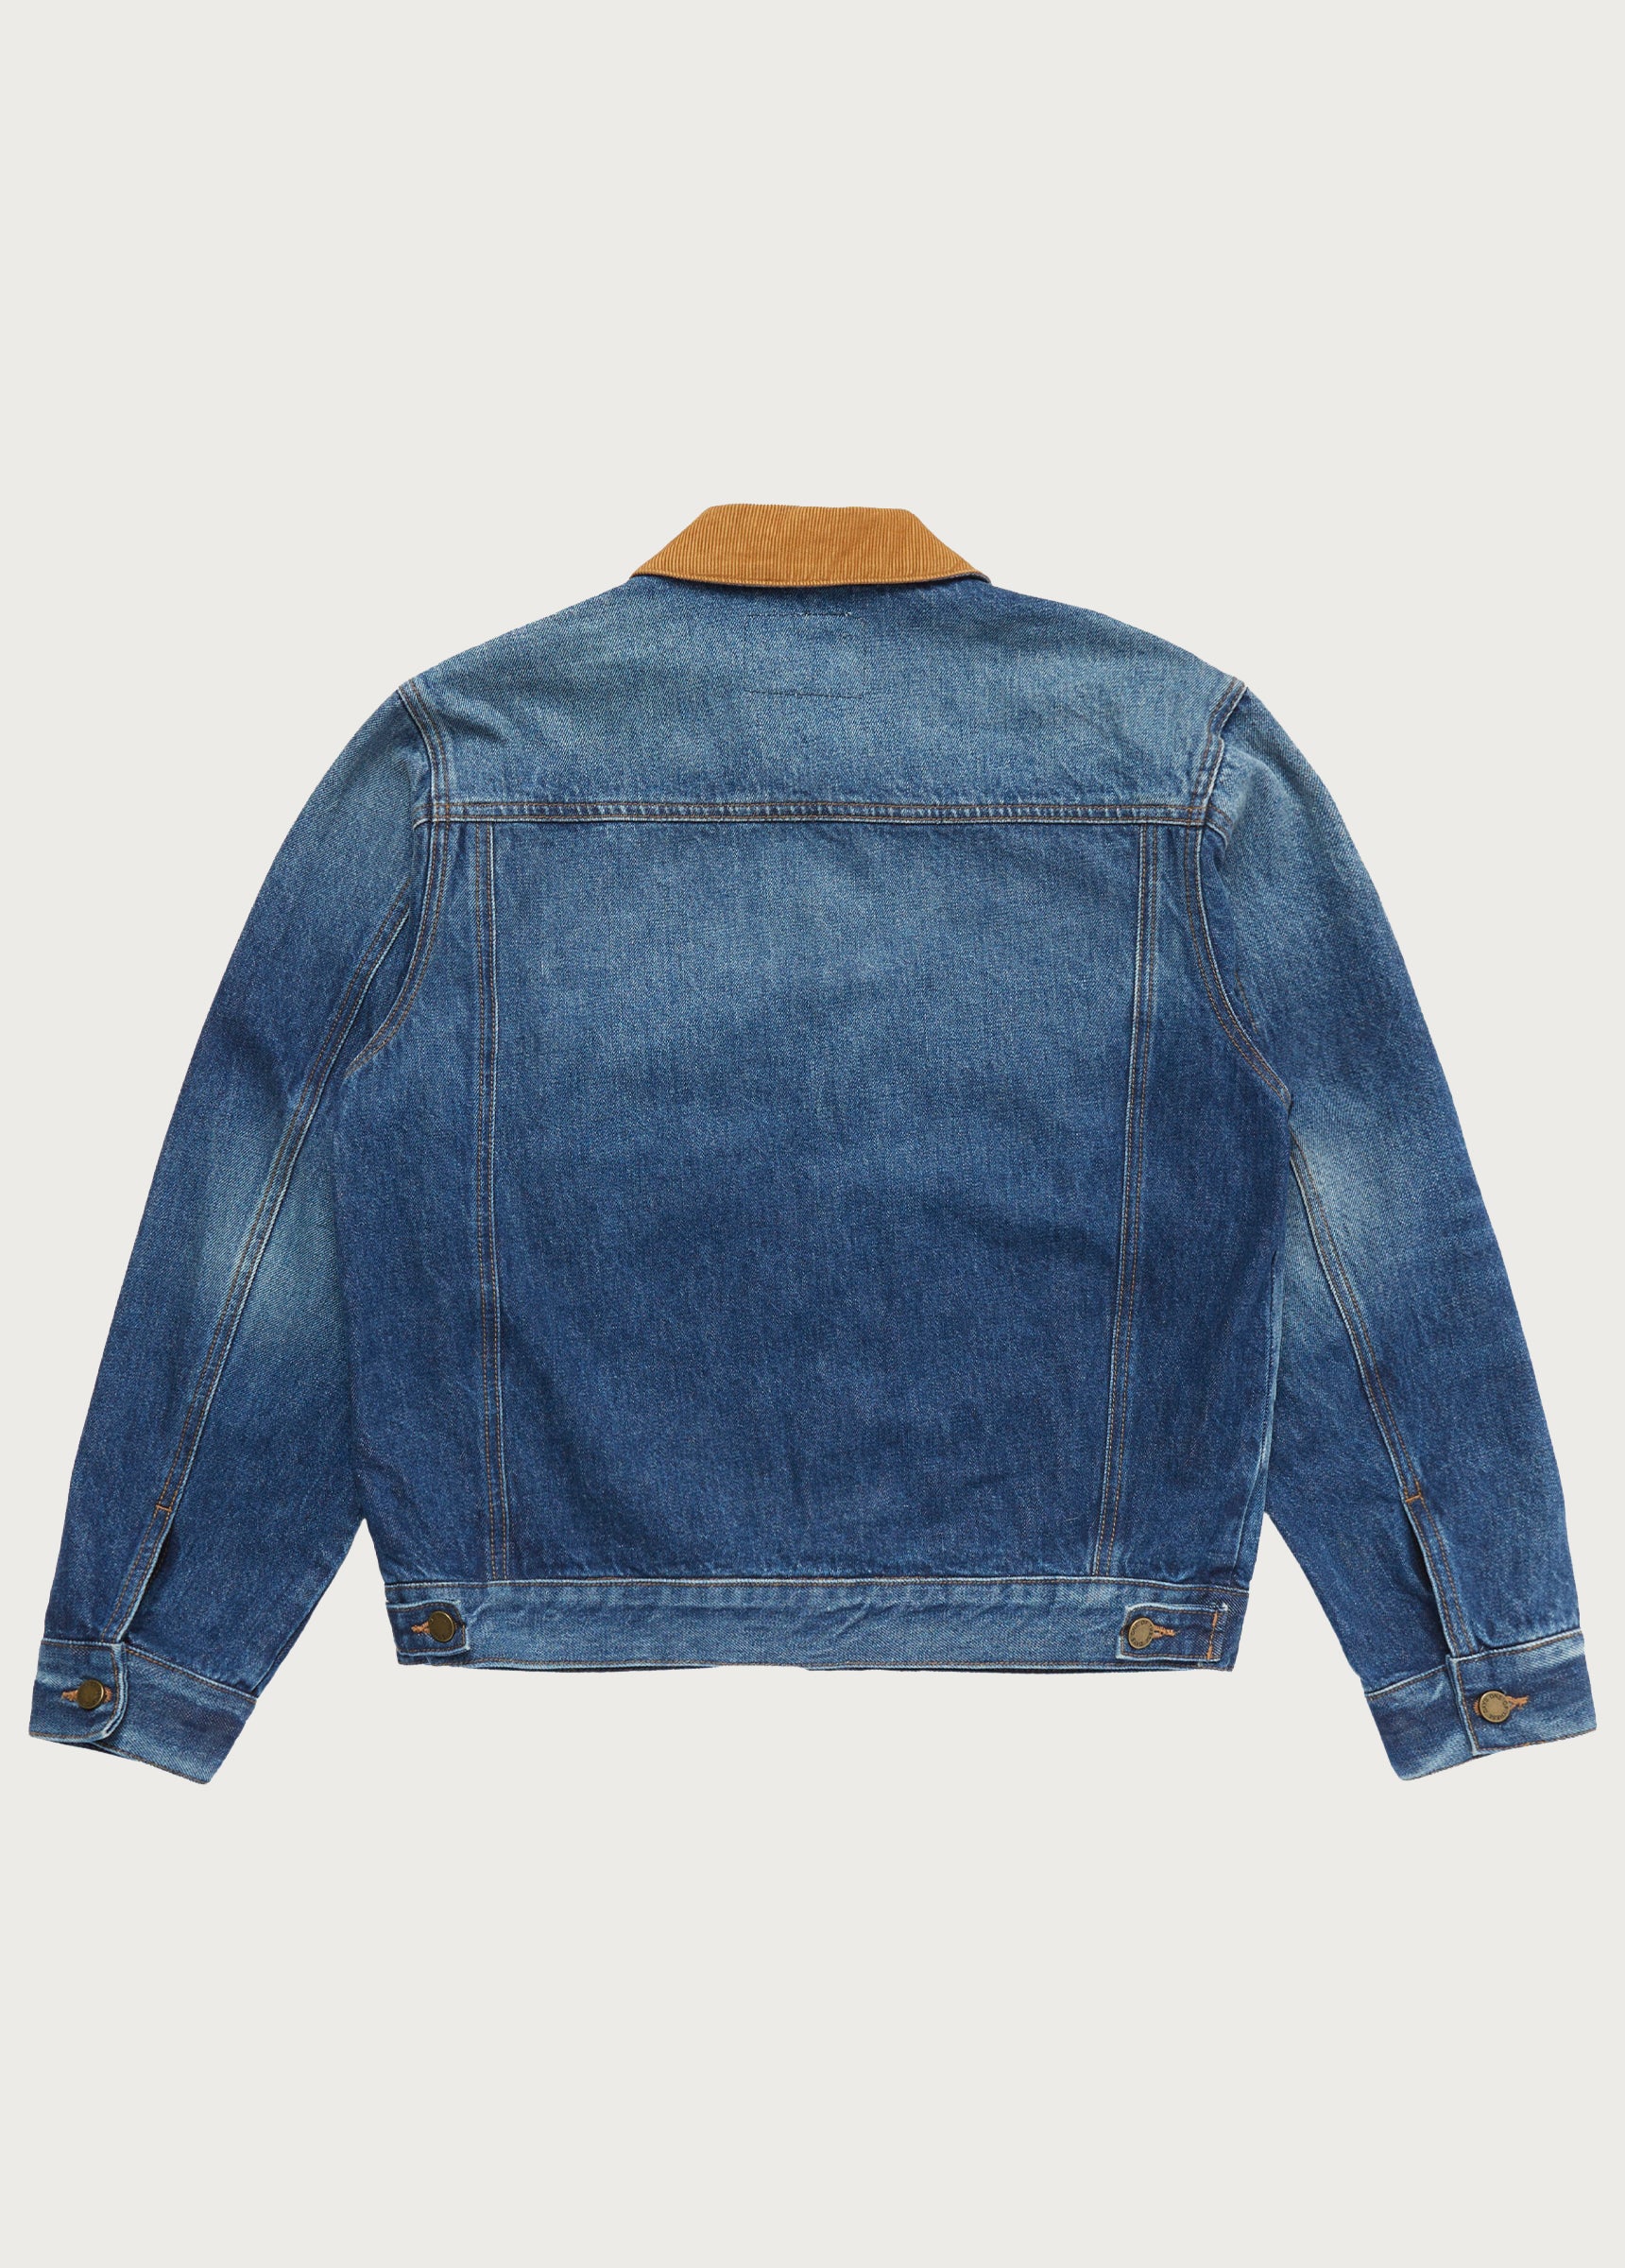 Trucker Jacket - Denim | The Northern Sky Collection | One Of These Days